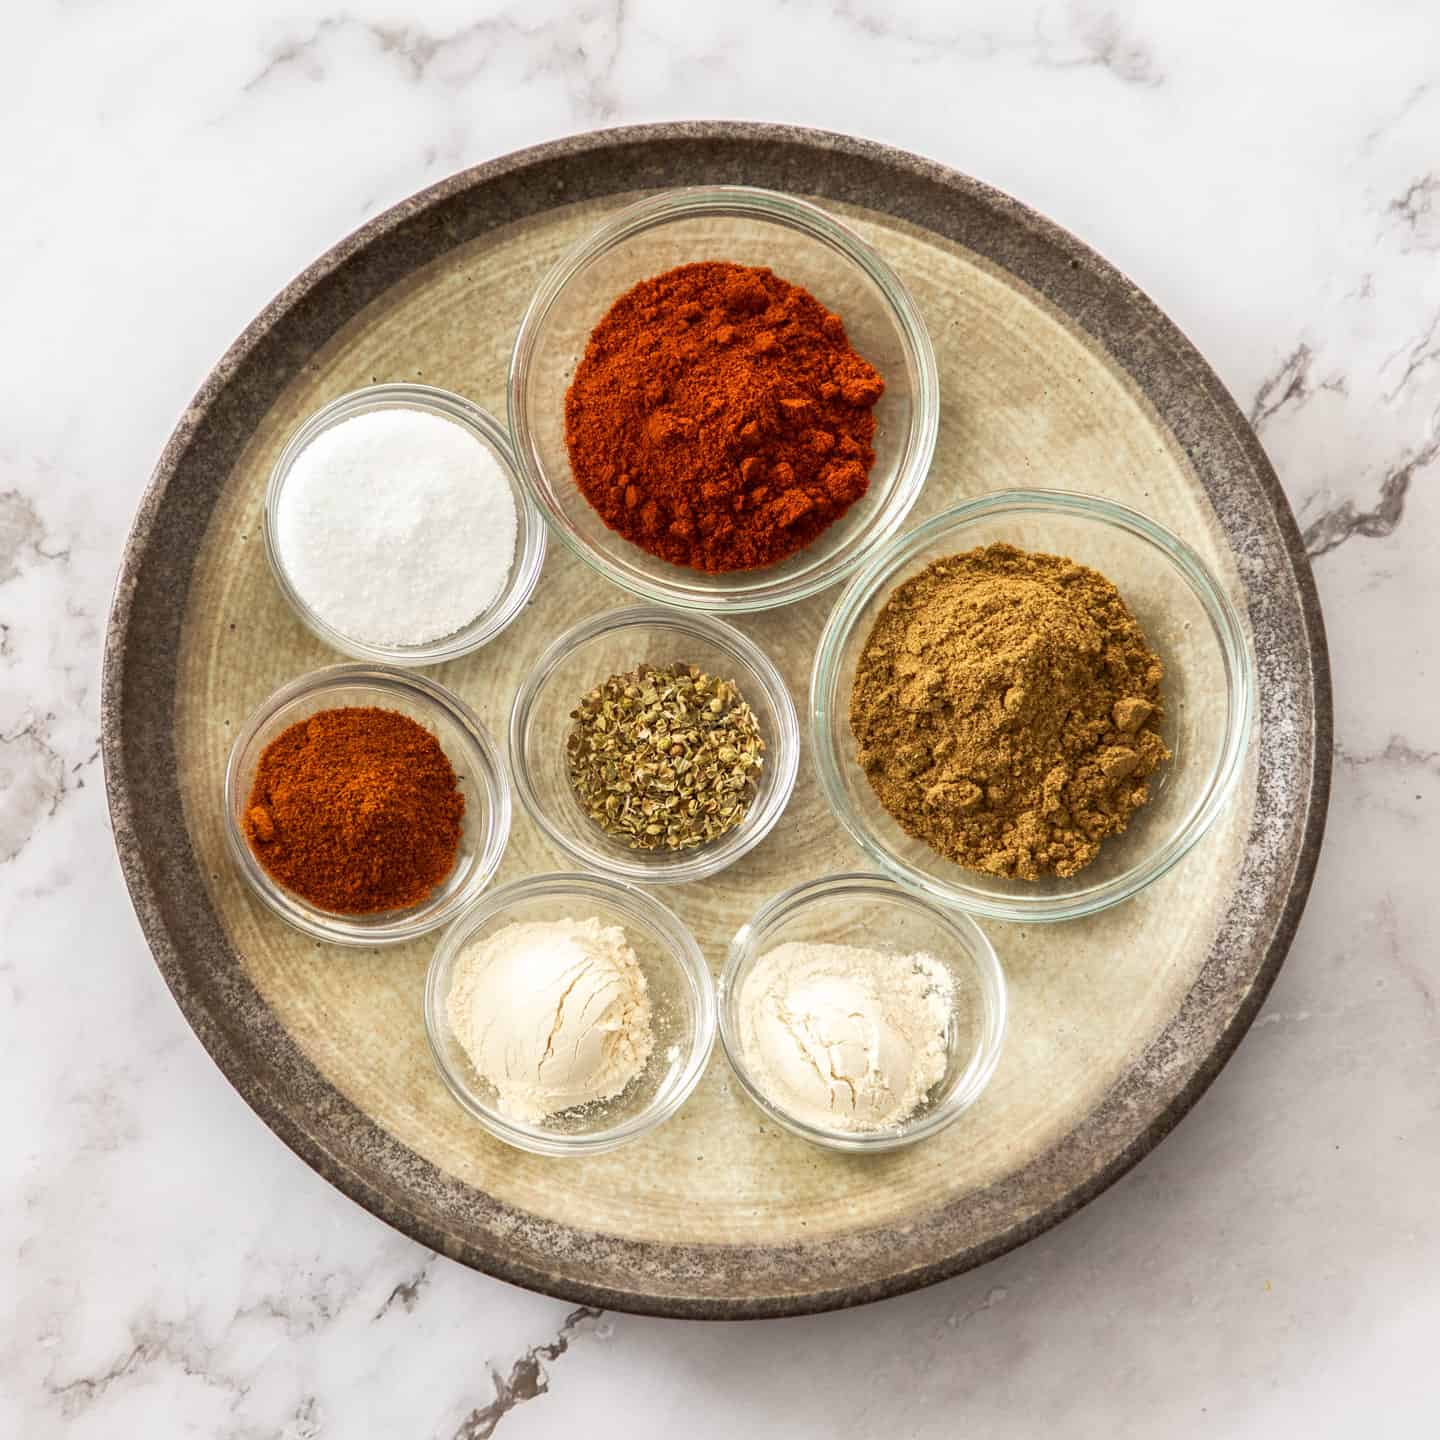 Ingredients for taco seasoning on a round plate.